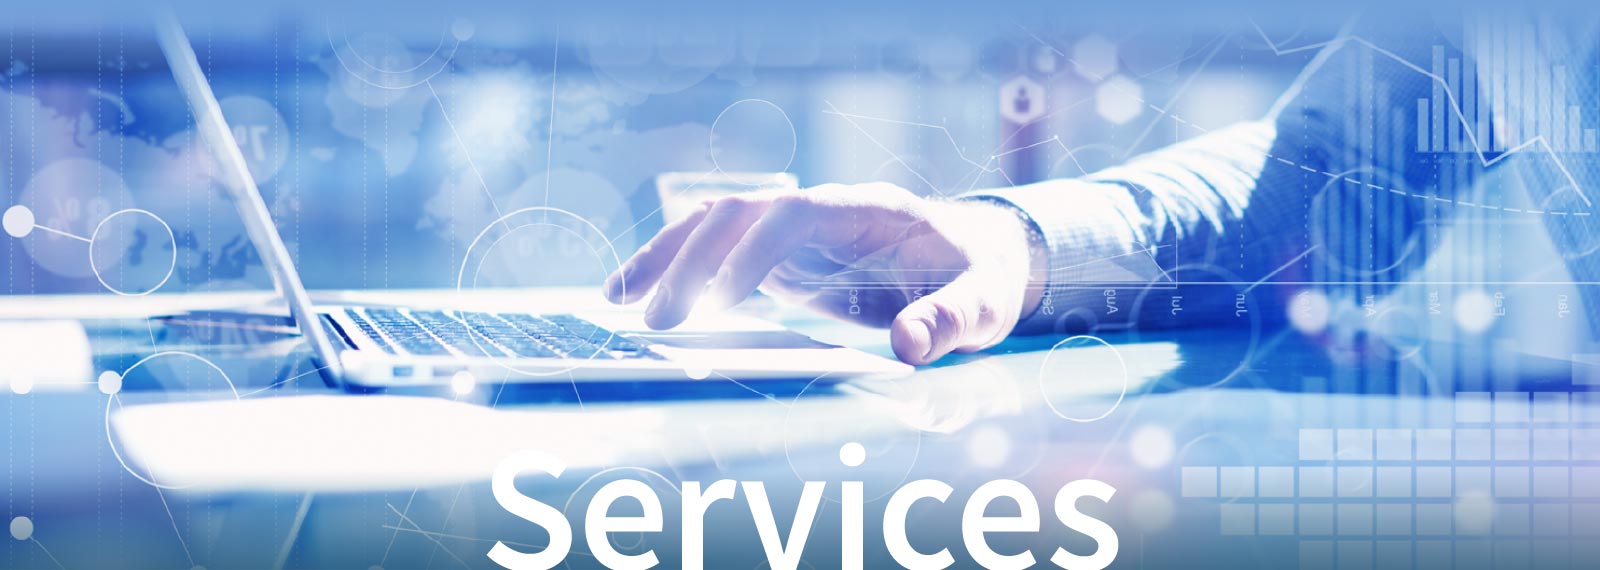 banner for services page, a hand tapping the keyboard of a laptop, side view, data arcs, numbers and lines superimposed throughout.